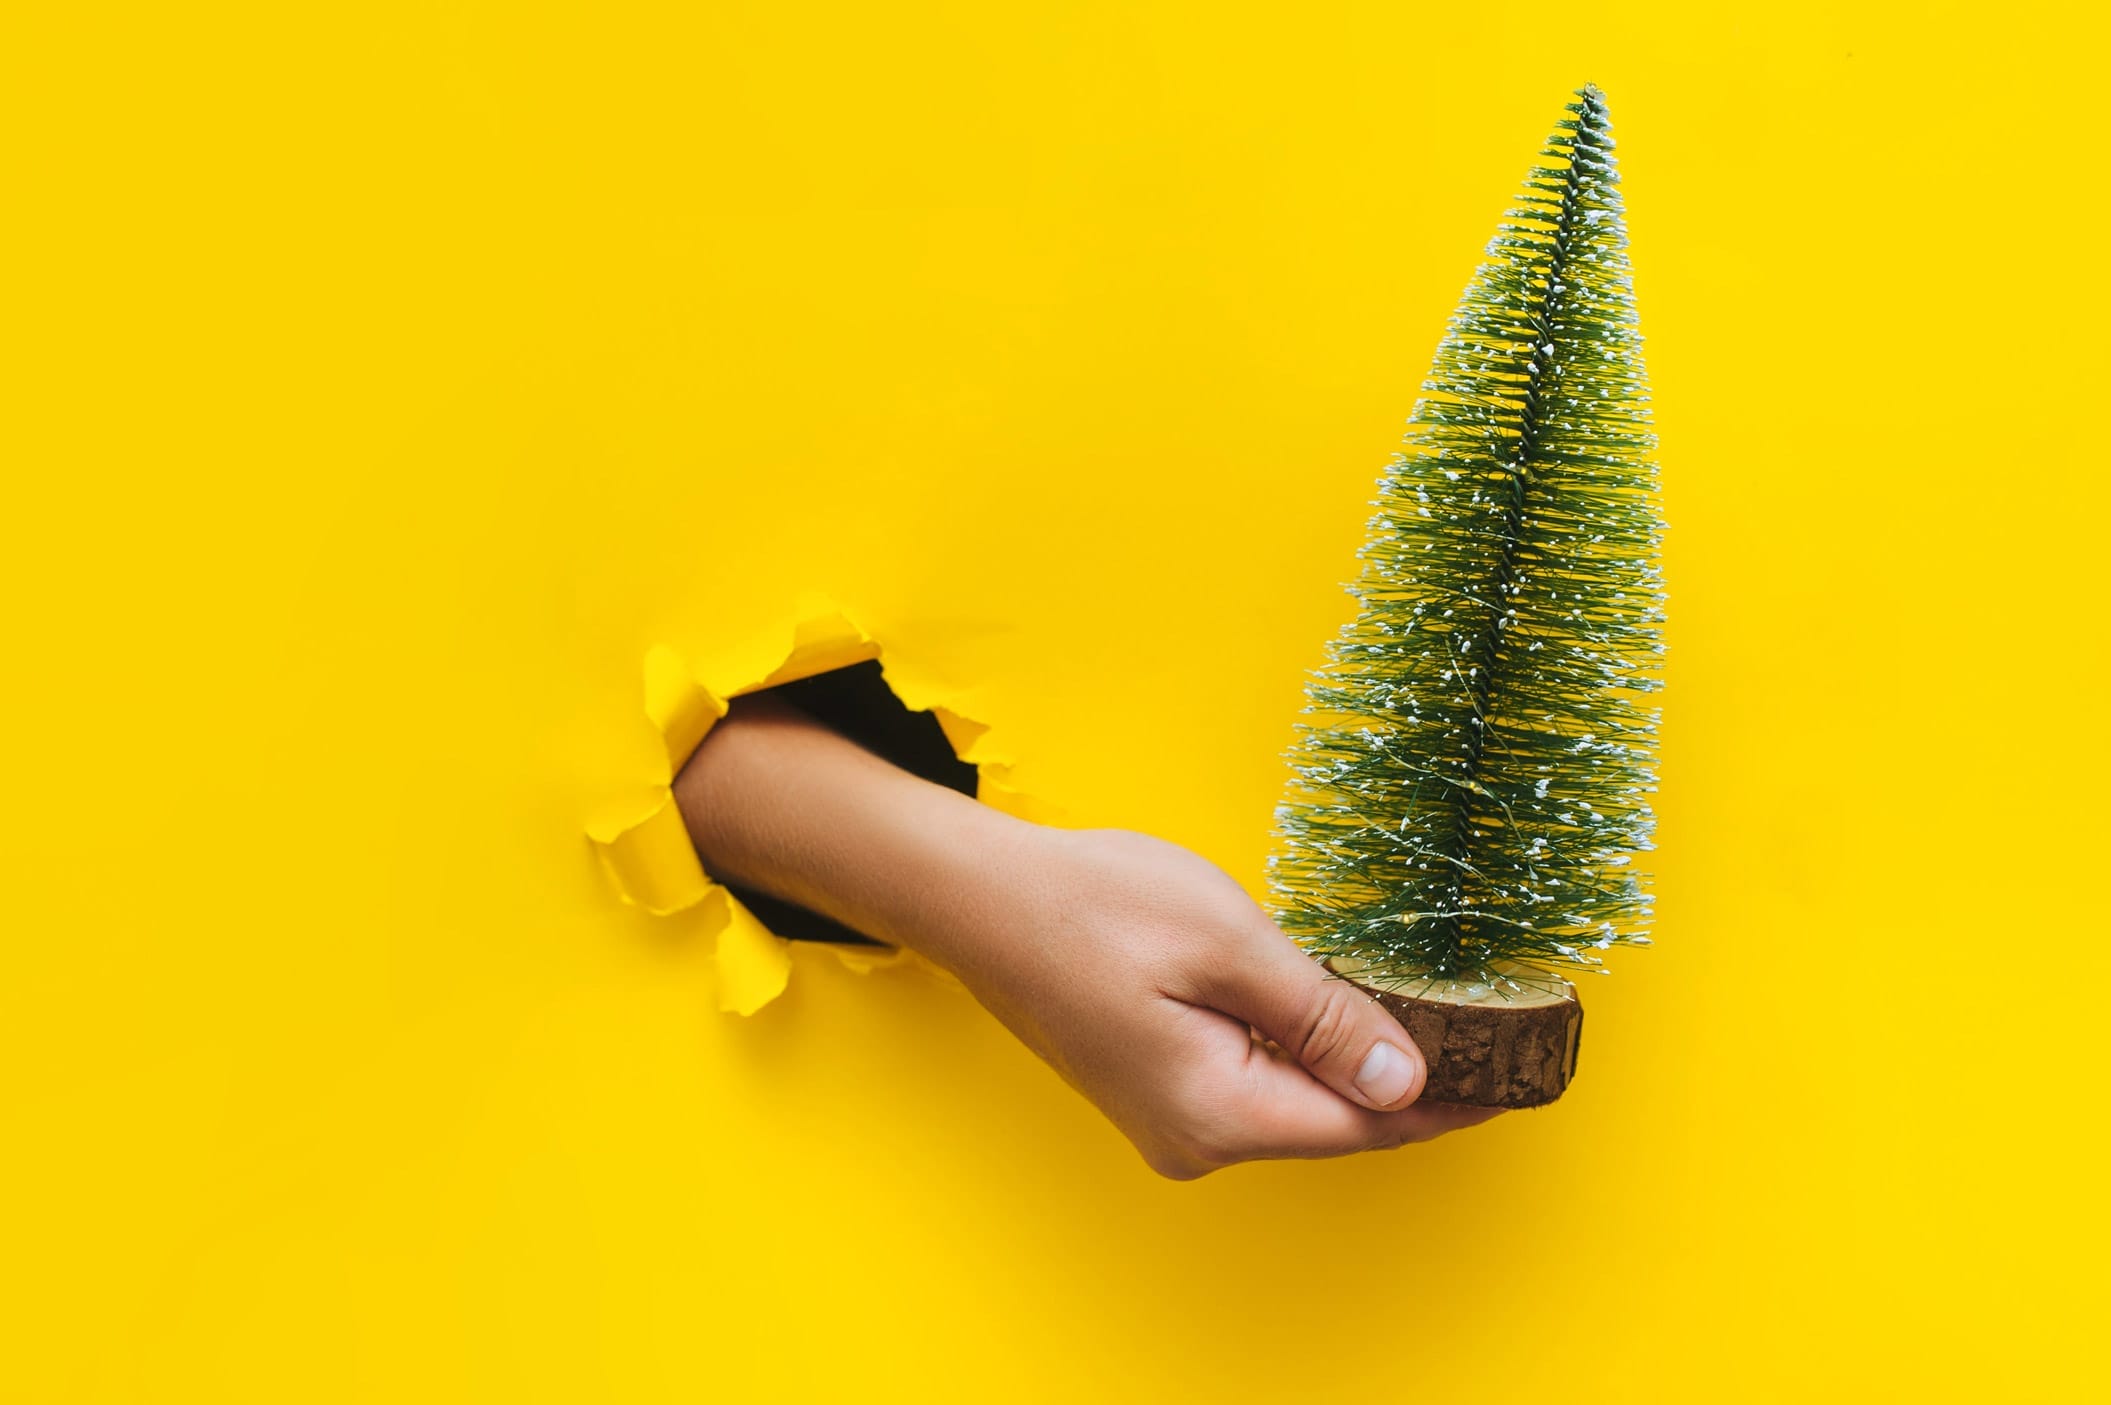 A hand holding a small fir tree bursts through a bright yellow paper background.